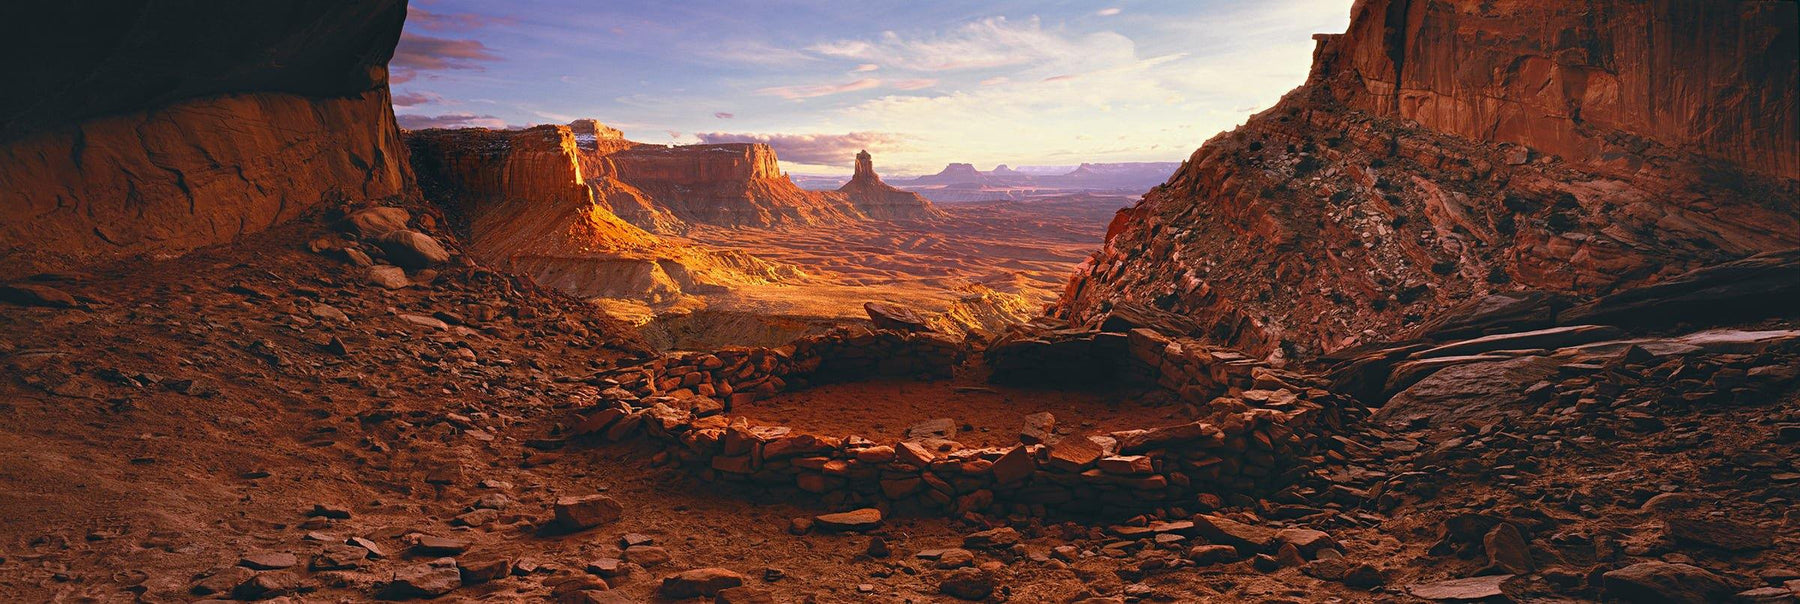 Man made stone circle on a rock plateau overlooking Canyonlands National Park Utah